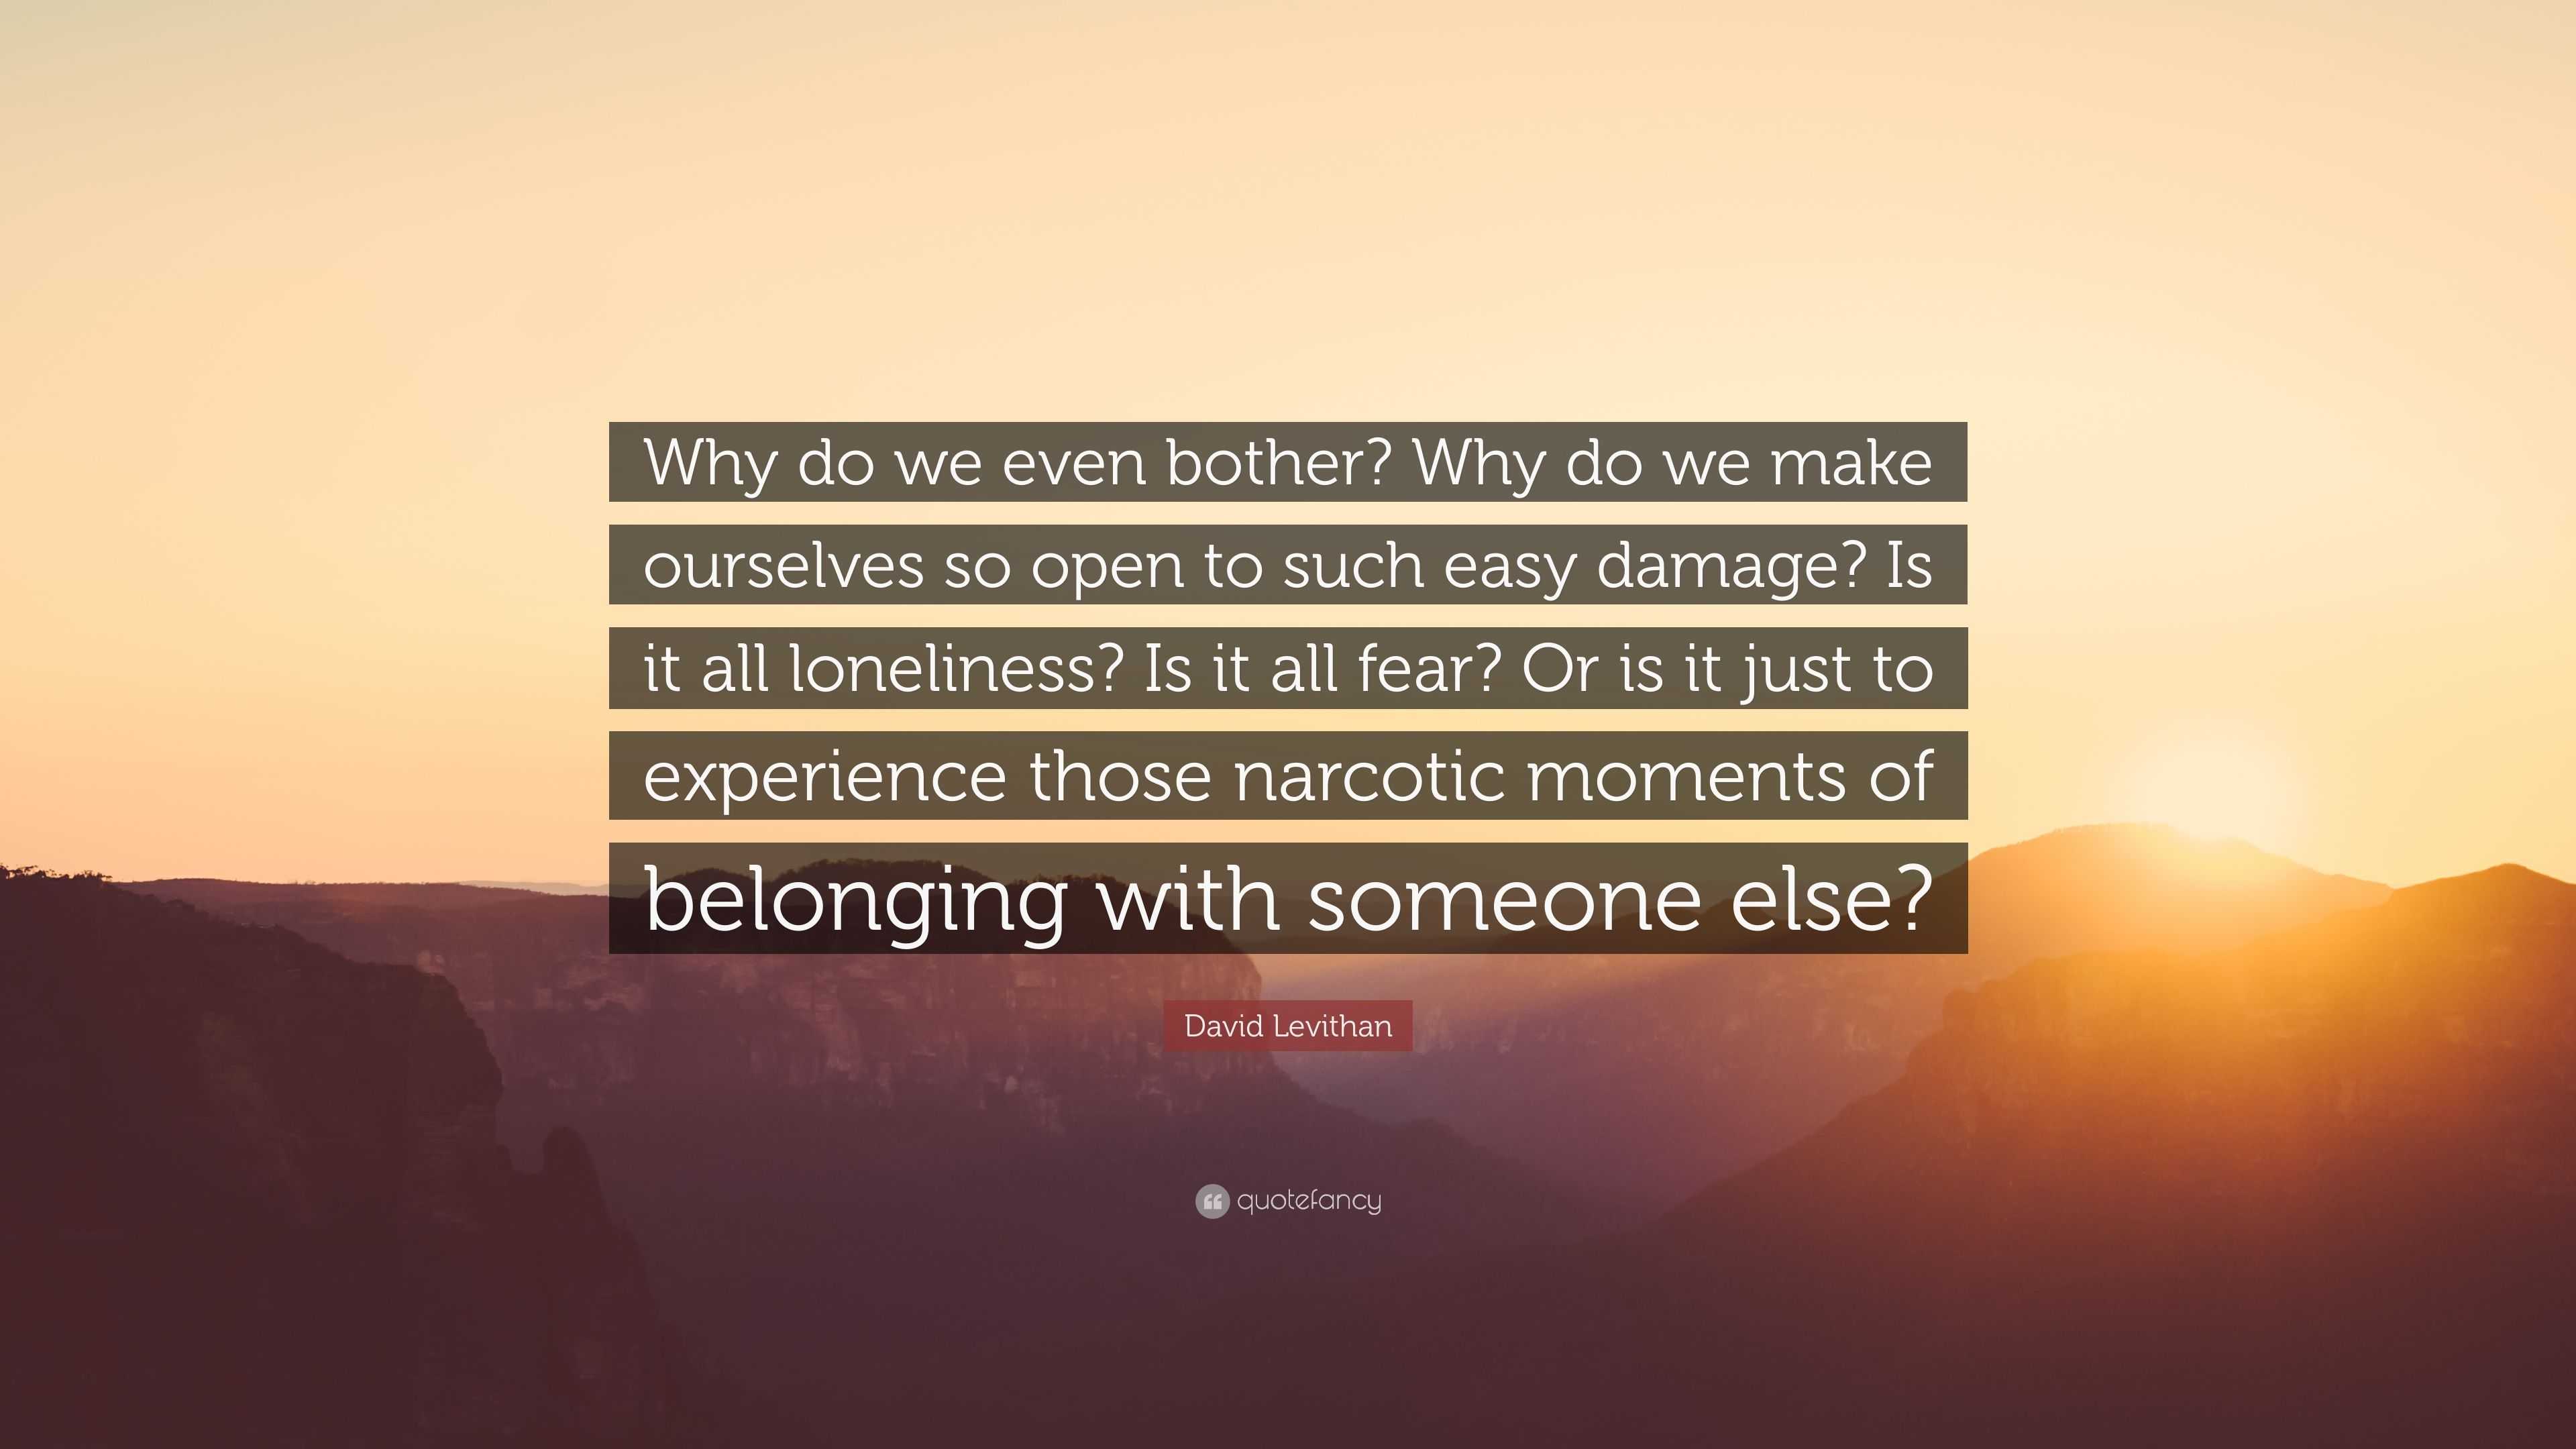 David Levithan Quote: “Why Do We Even Bother? Why Do We Make Ourselves So Open To Such Easy Damage? Is It All Loneliness? Is It All Fear? Or Is...”